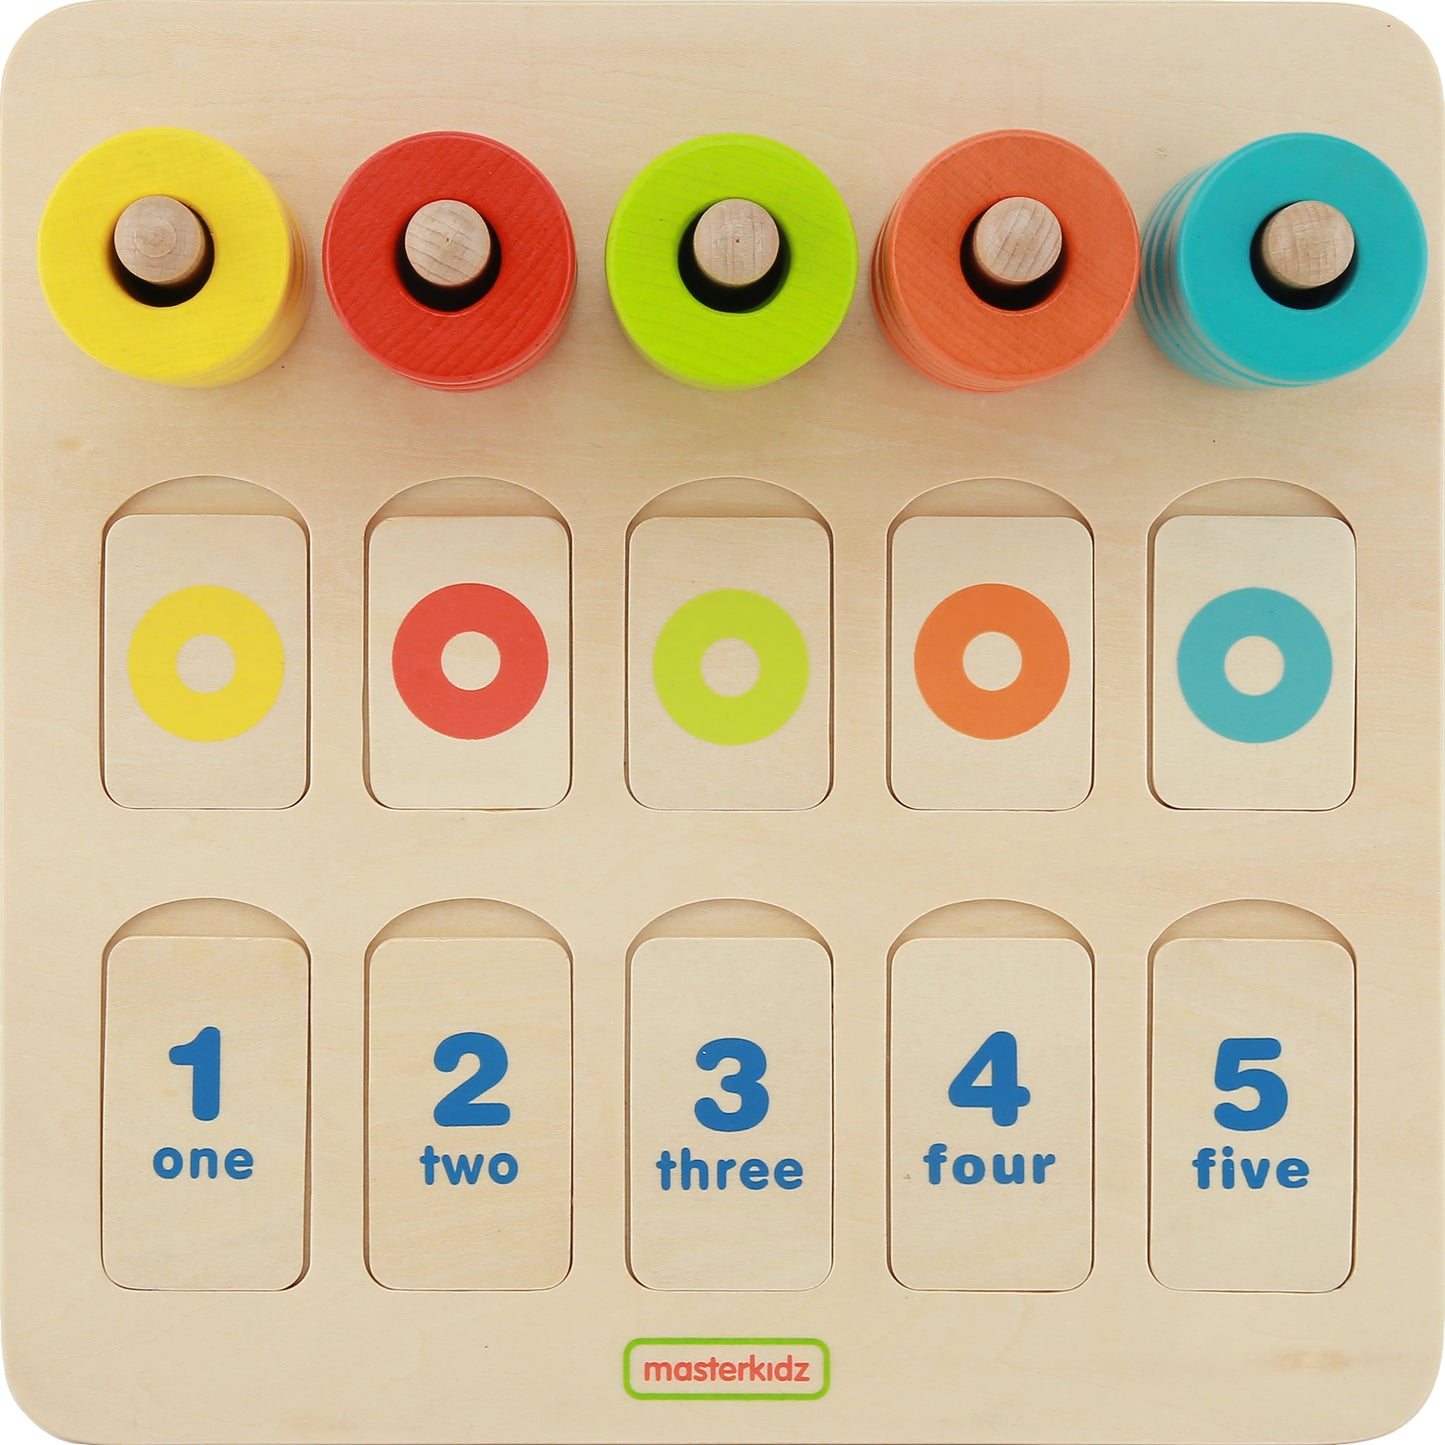 Masterkidz Counting and Colors Learning Board 顏色數量學習玩具